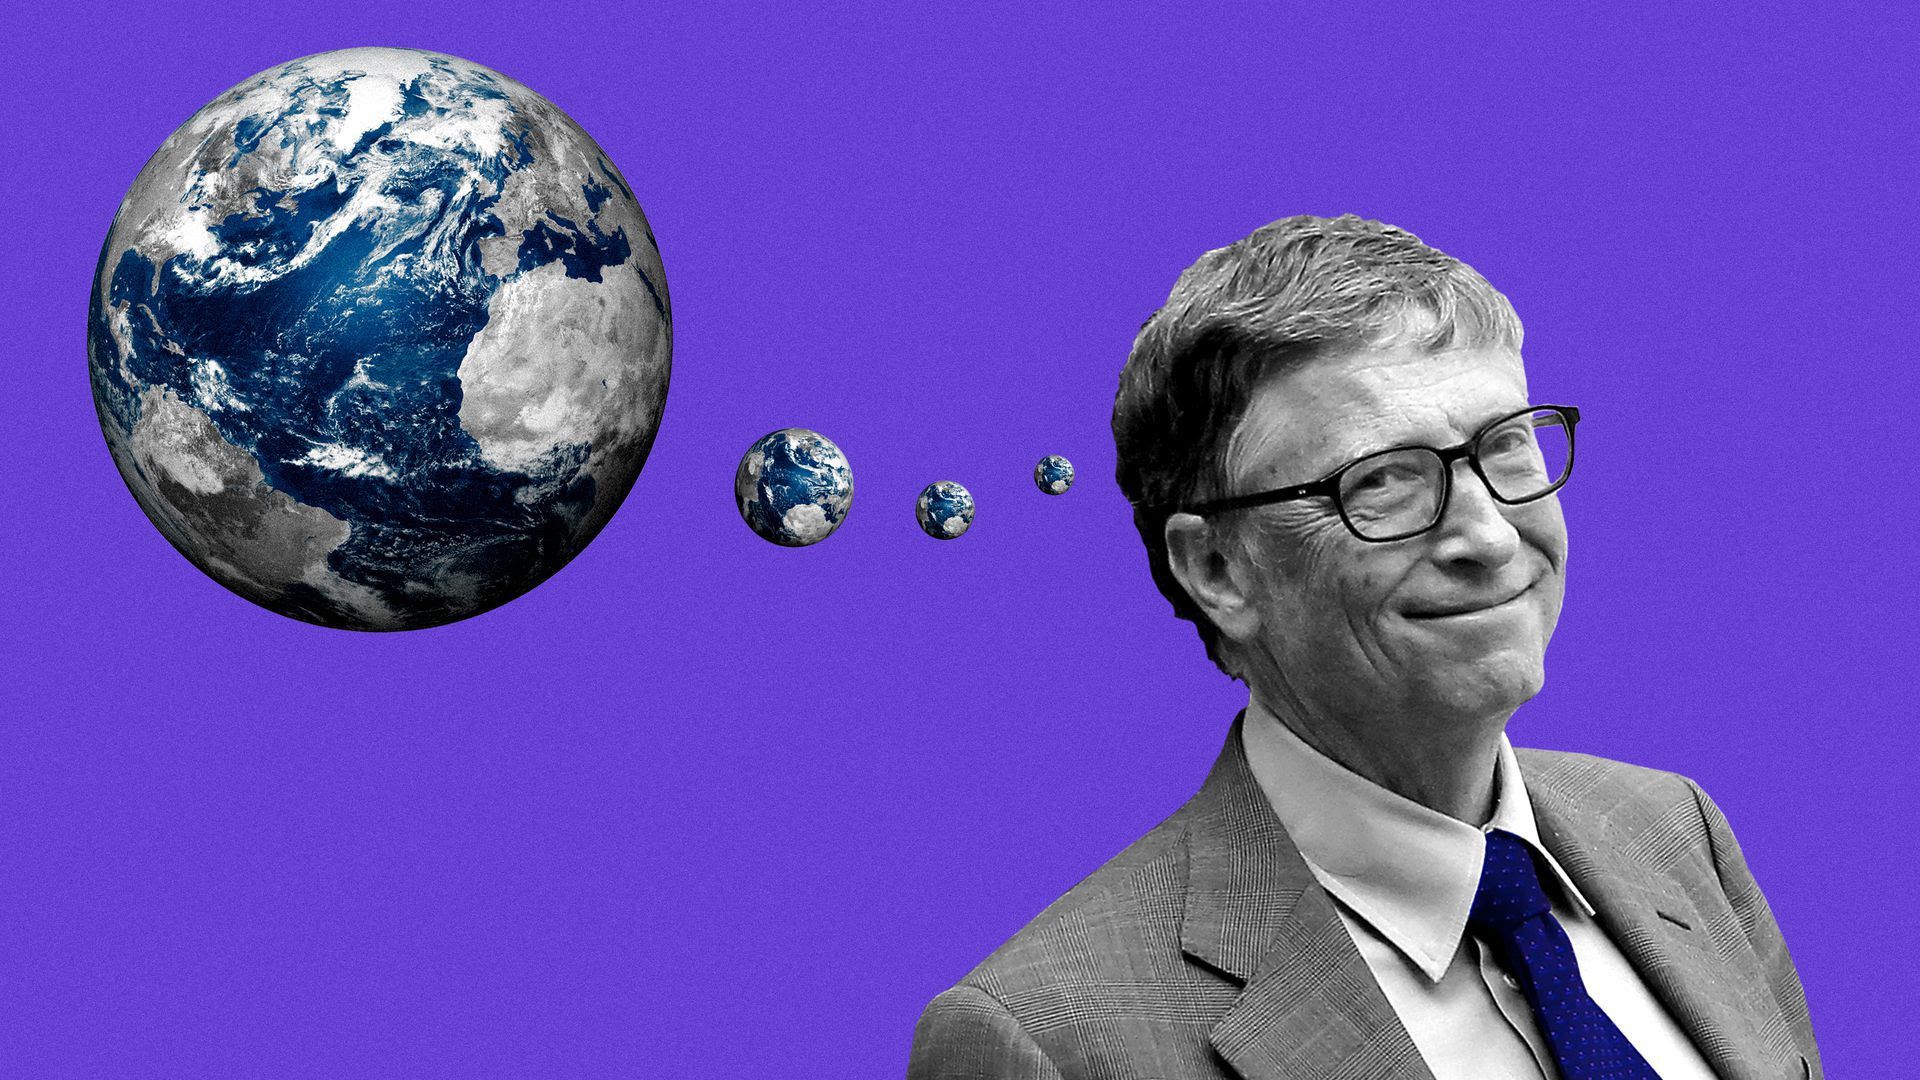 Bill Gates with thought bubbles that resemble Earth